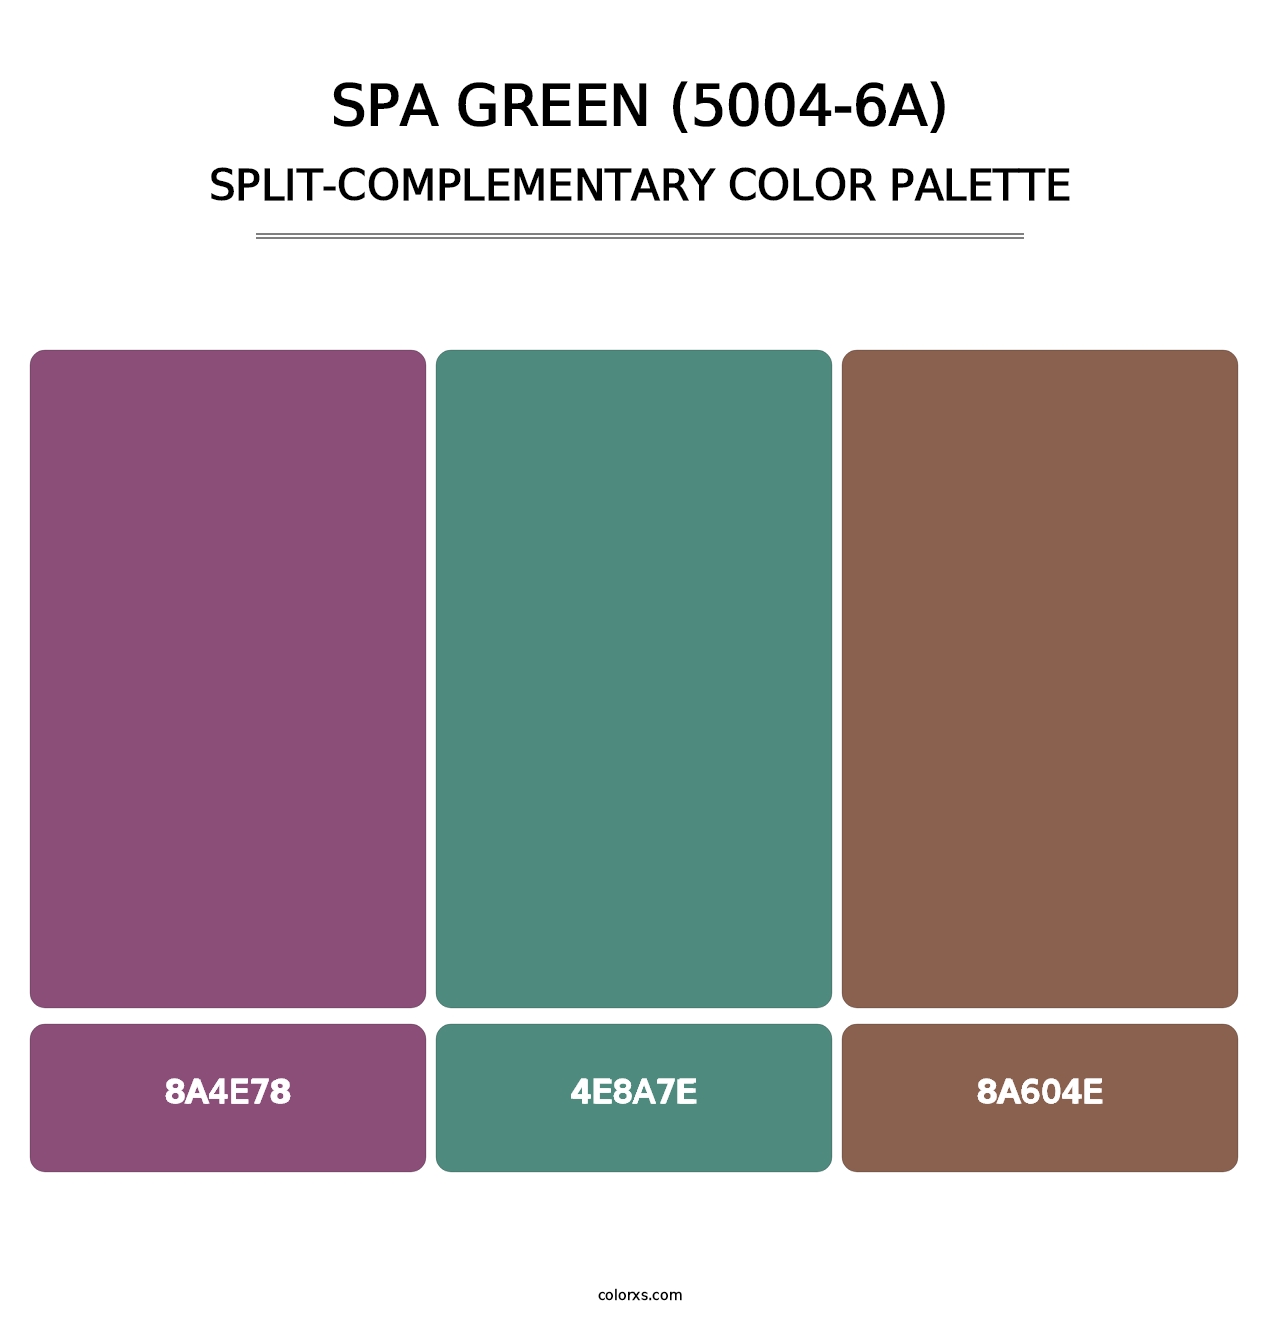 Spa Green (5004-6A) - Split-Complementary Color Palette